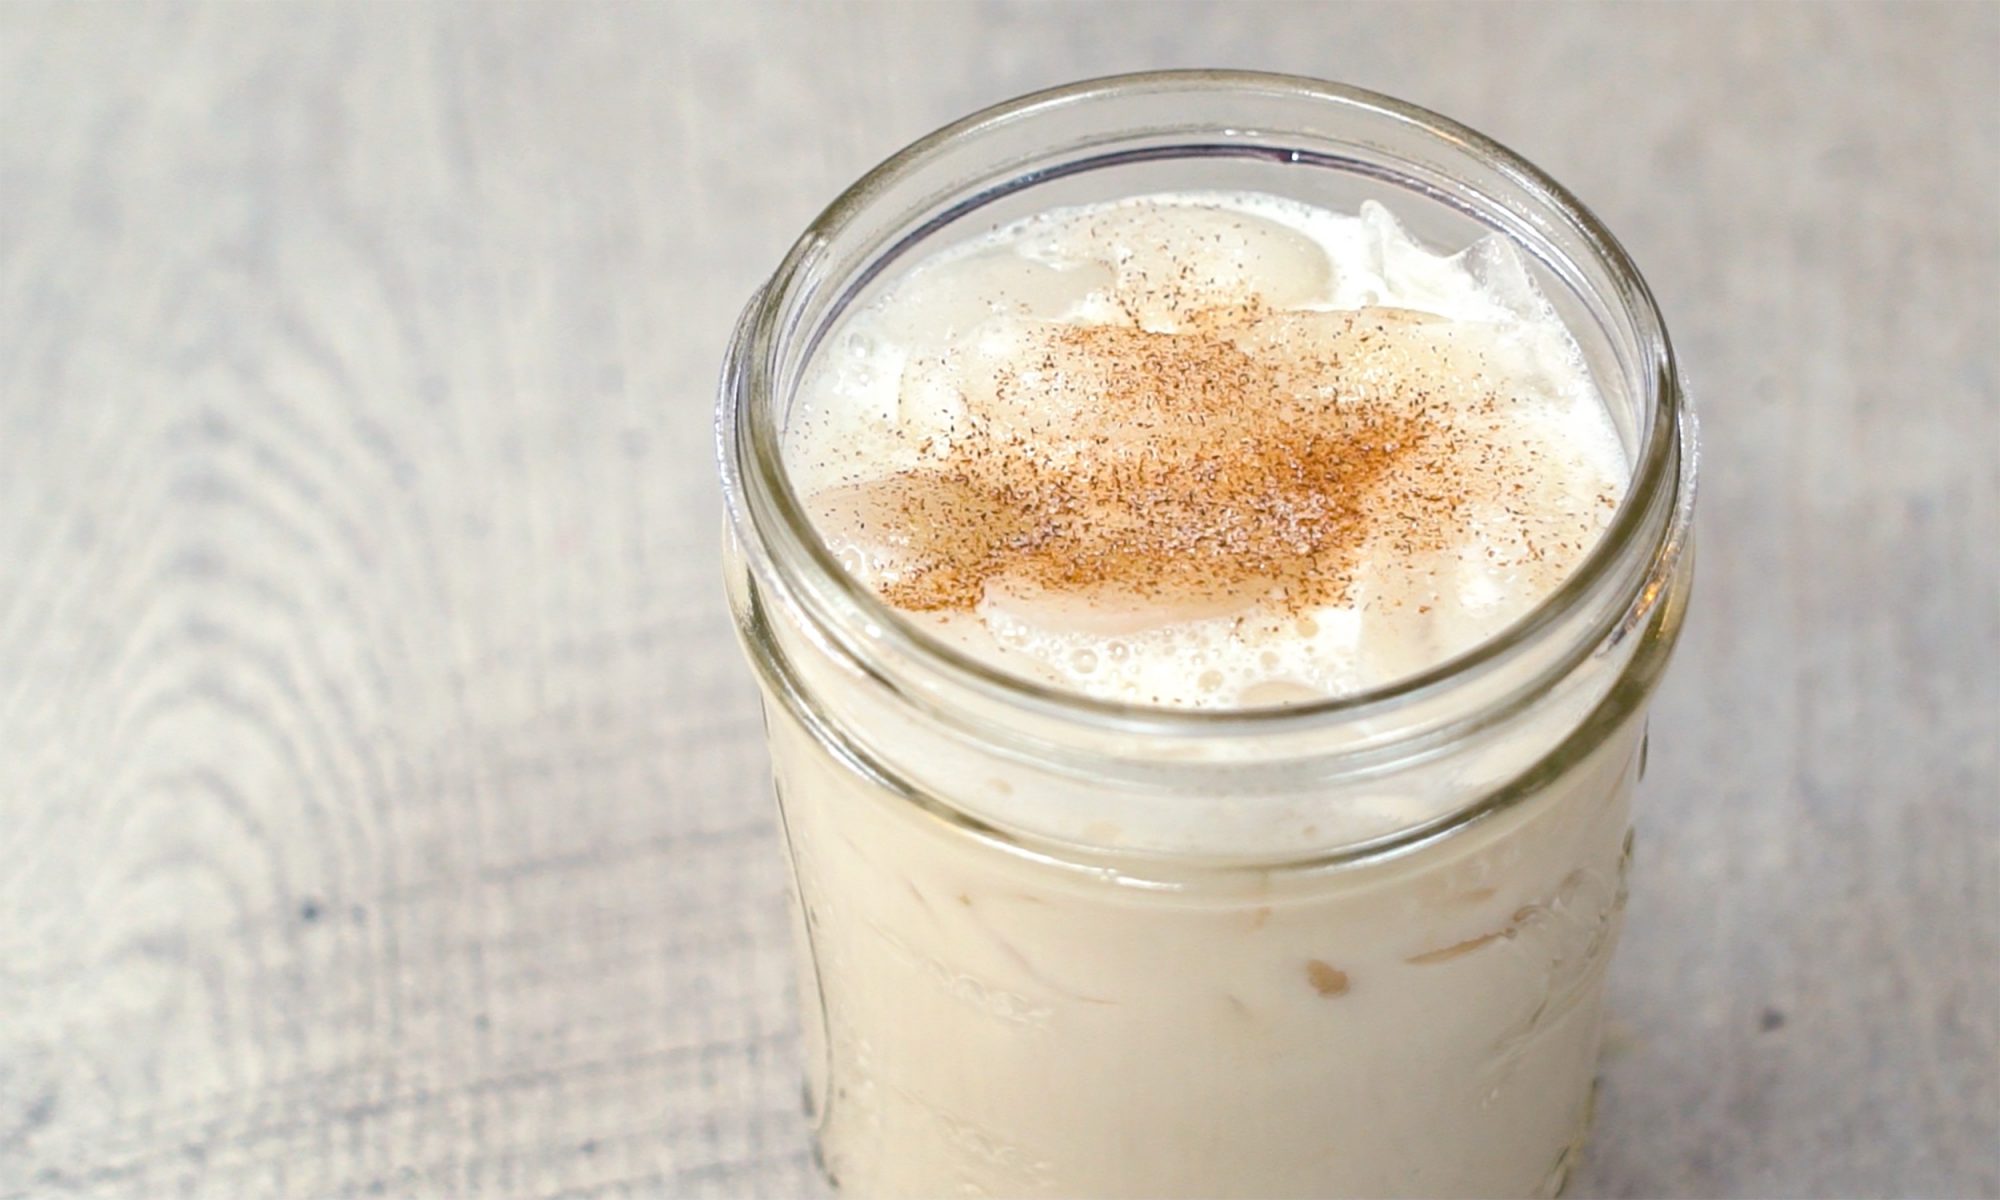 This Spiced Rum Milk Punch Is Like Eggnog Without the Eggs 